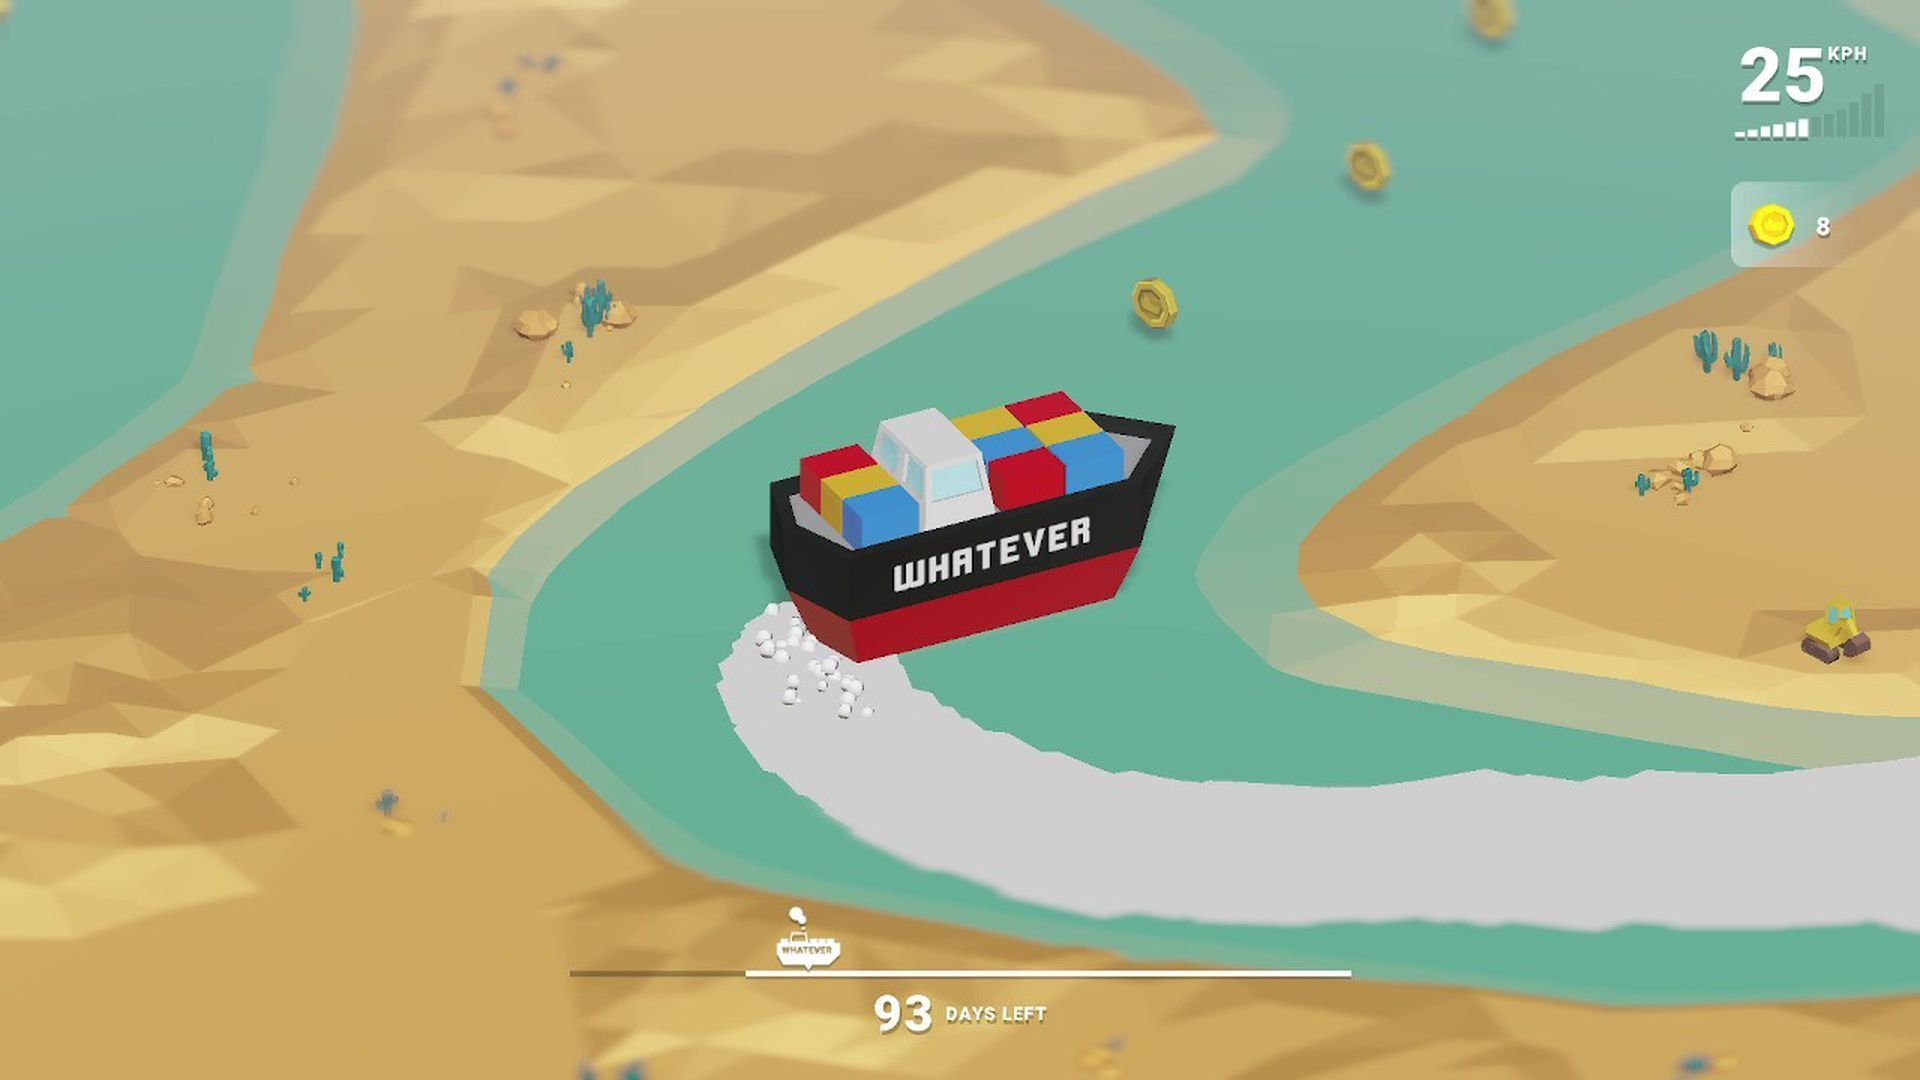 A screenshot of a video game graphic showing a cargo ship named "Whatever" navigating a narrow passage of water with land on both sides.